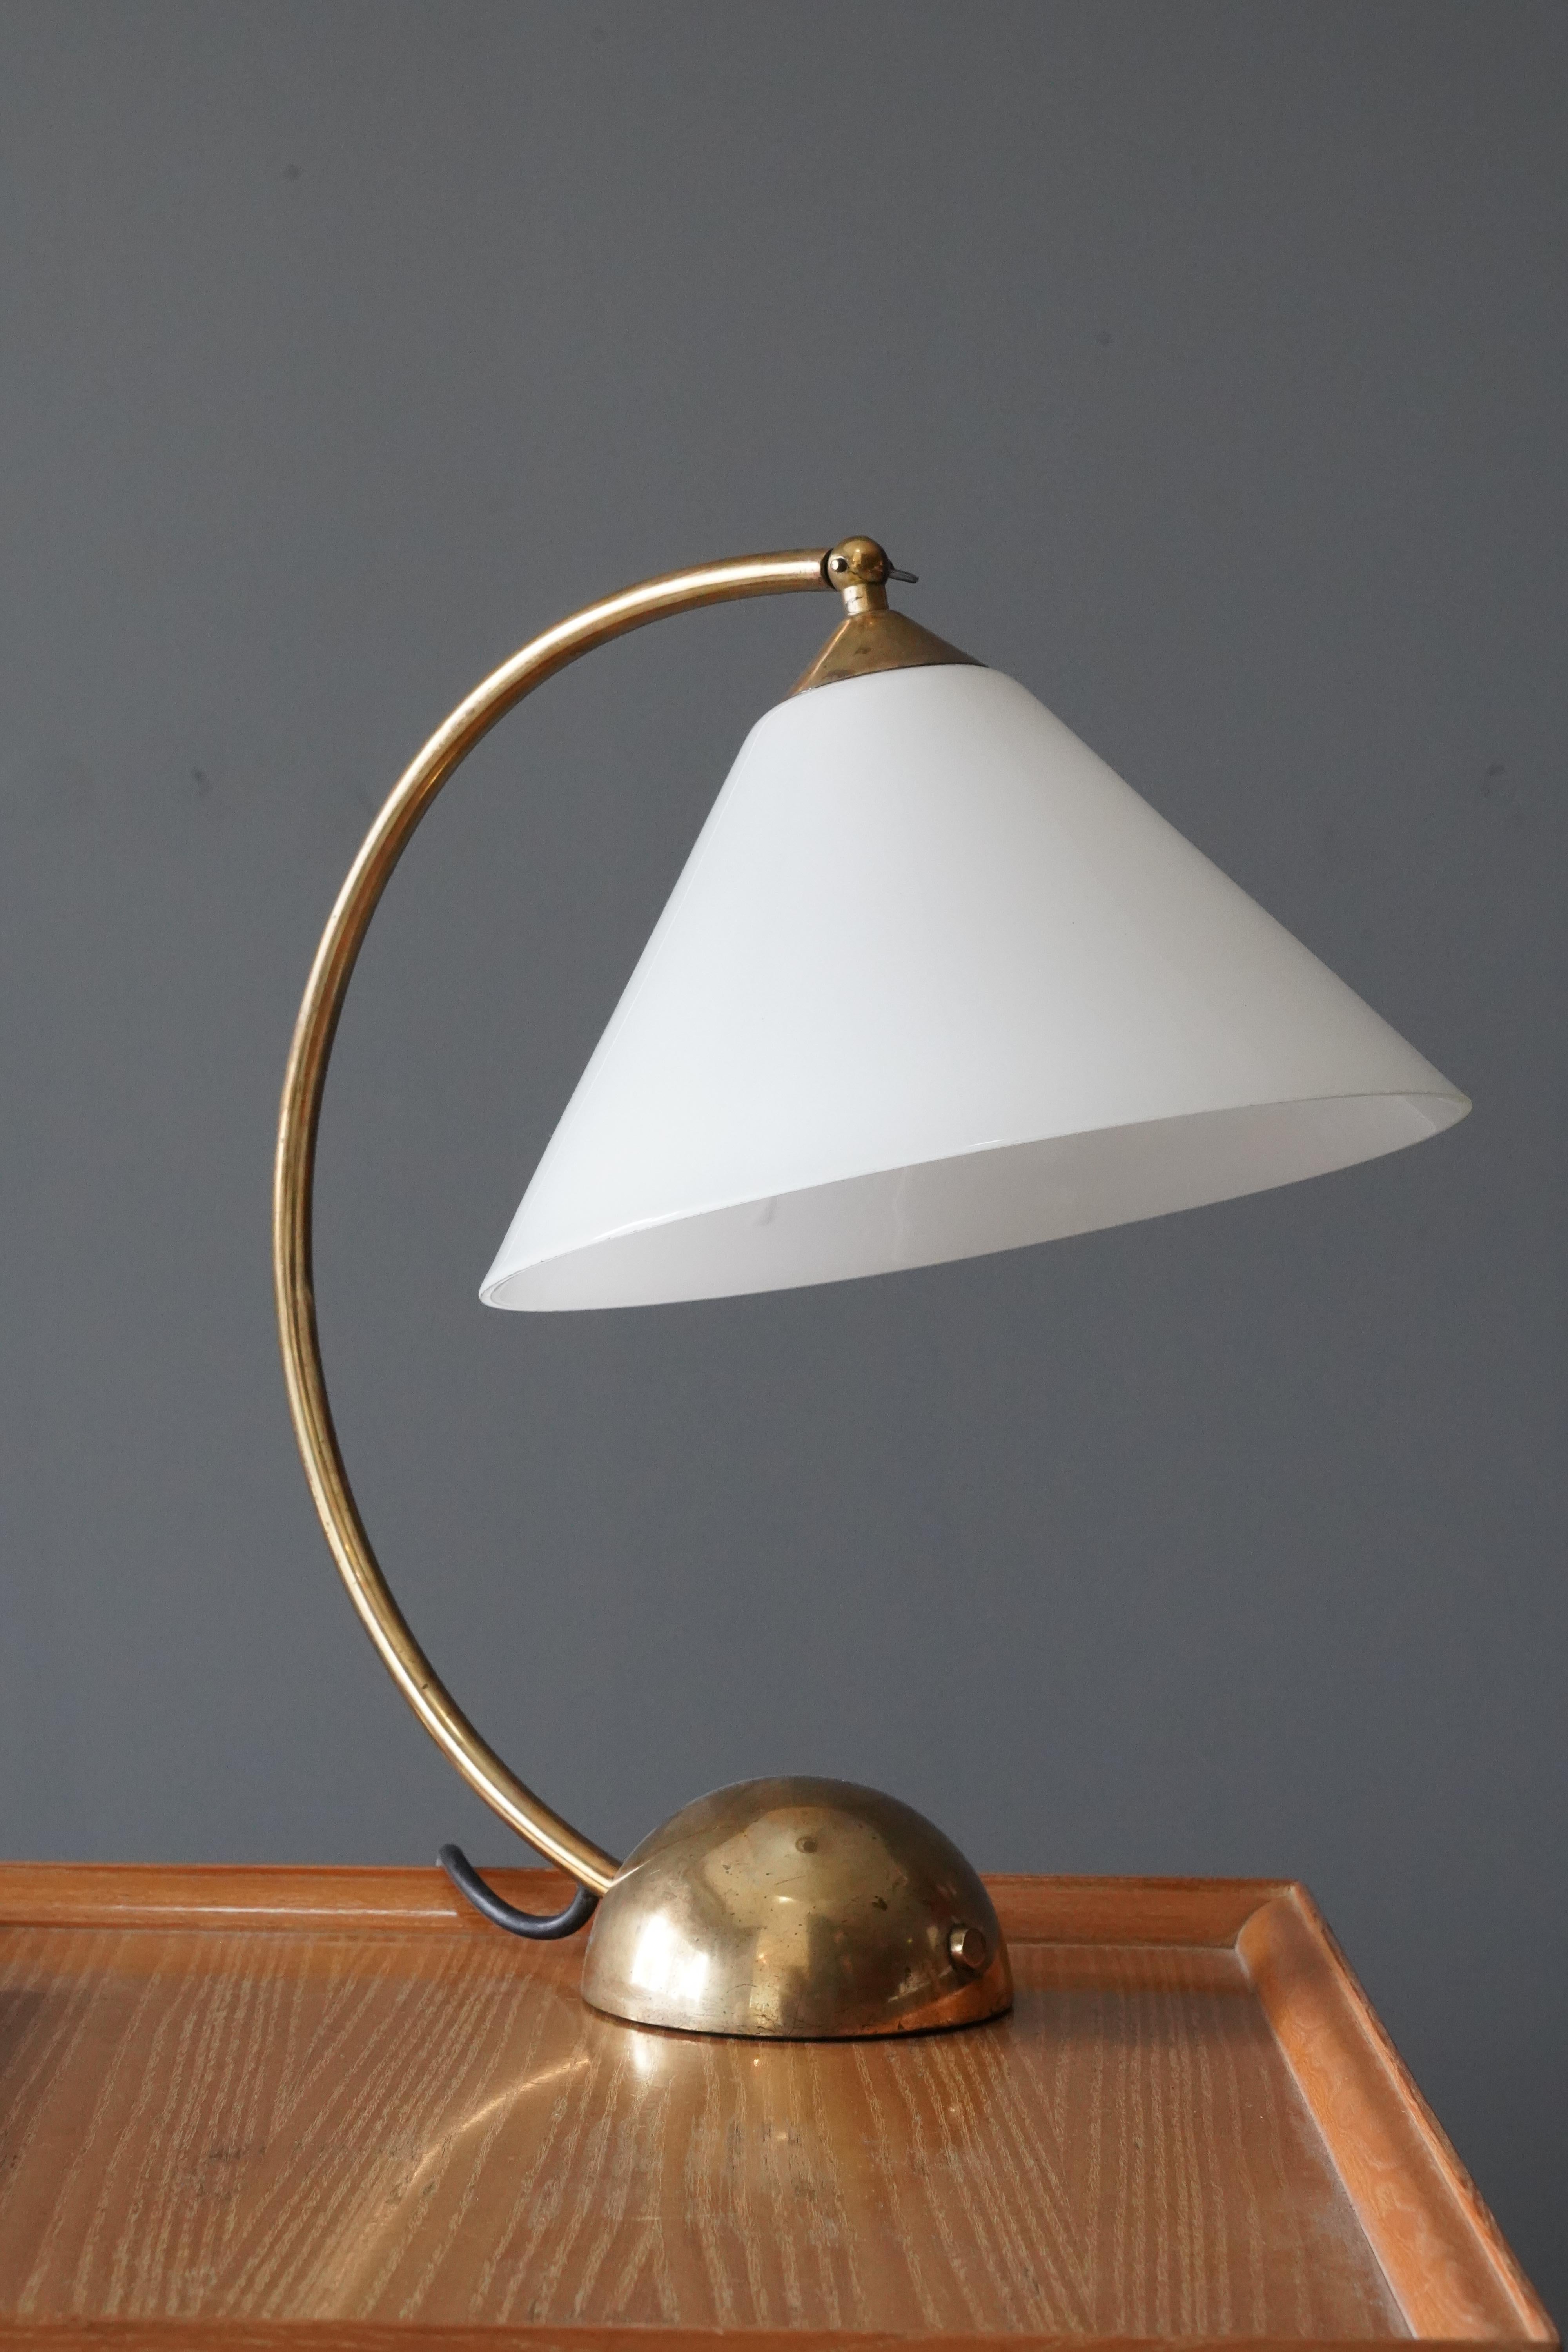 A functionalist table lamp or desk light. Design attributed to Pitt Müller, Germany, 1950s.

Adjustable, in brass, original milk glass lampshade.

Other designers of the period include Paavo Tynell, Serge Mouille, J.T. Kalmar, Hans Bergström,